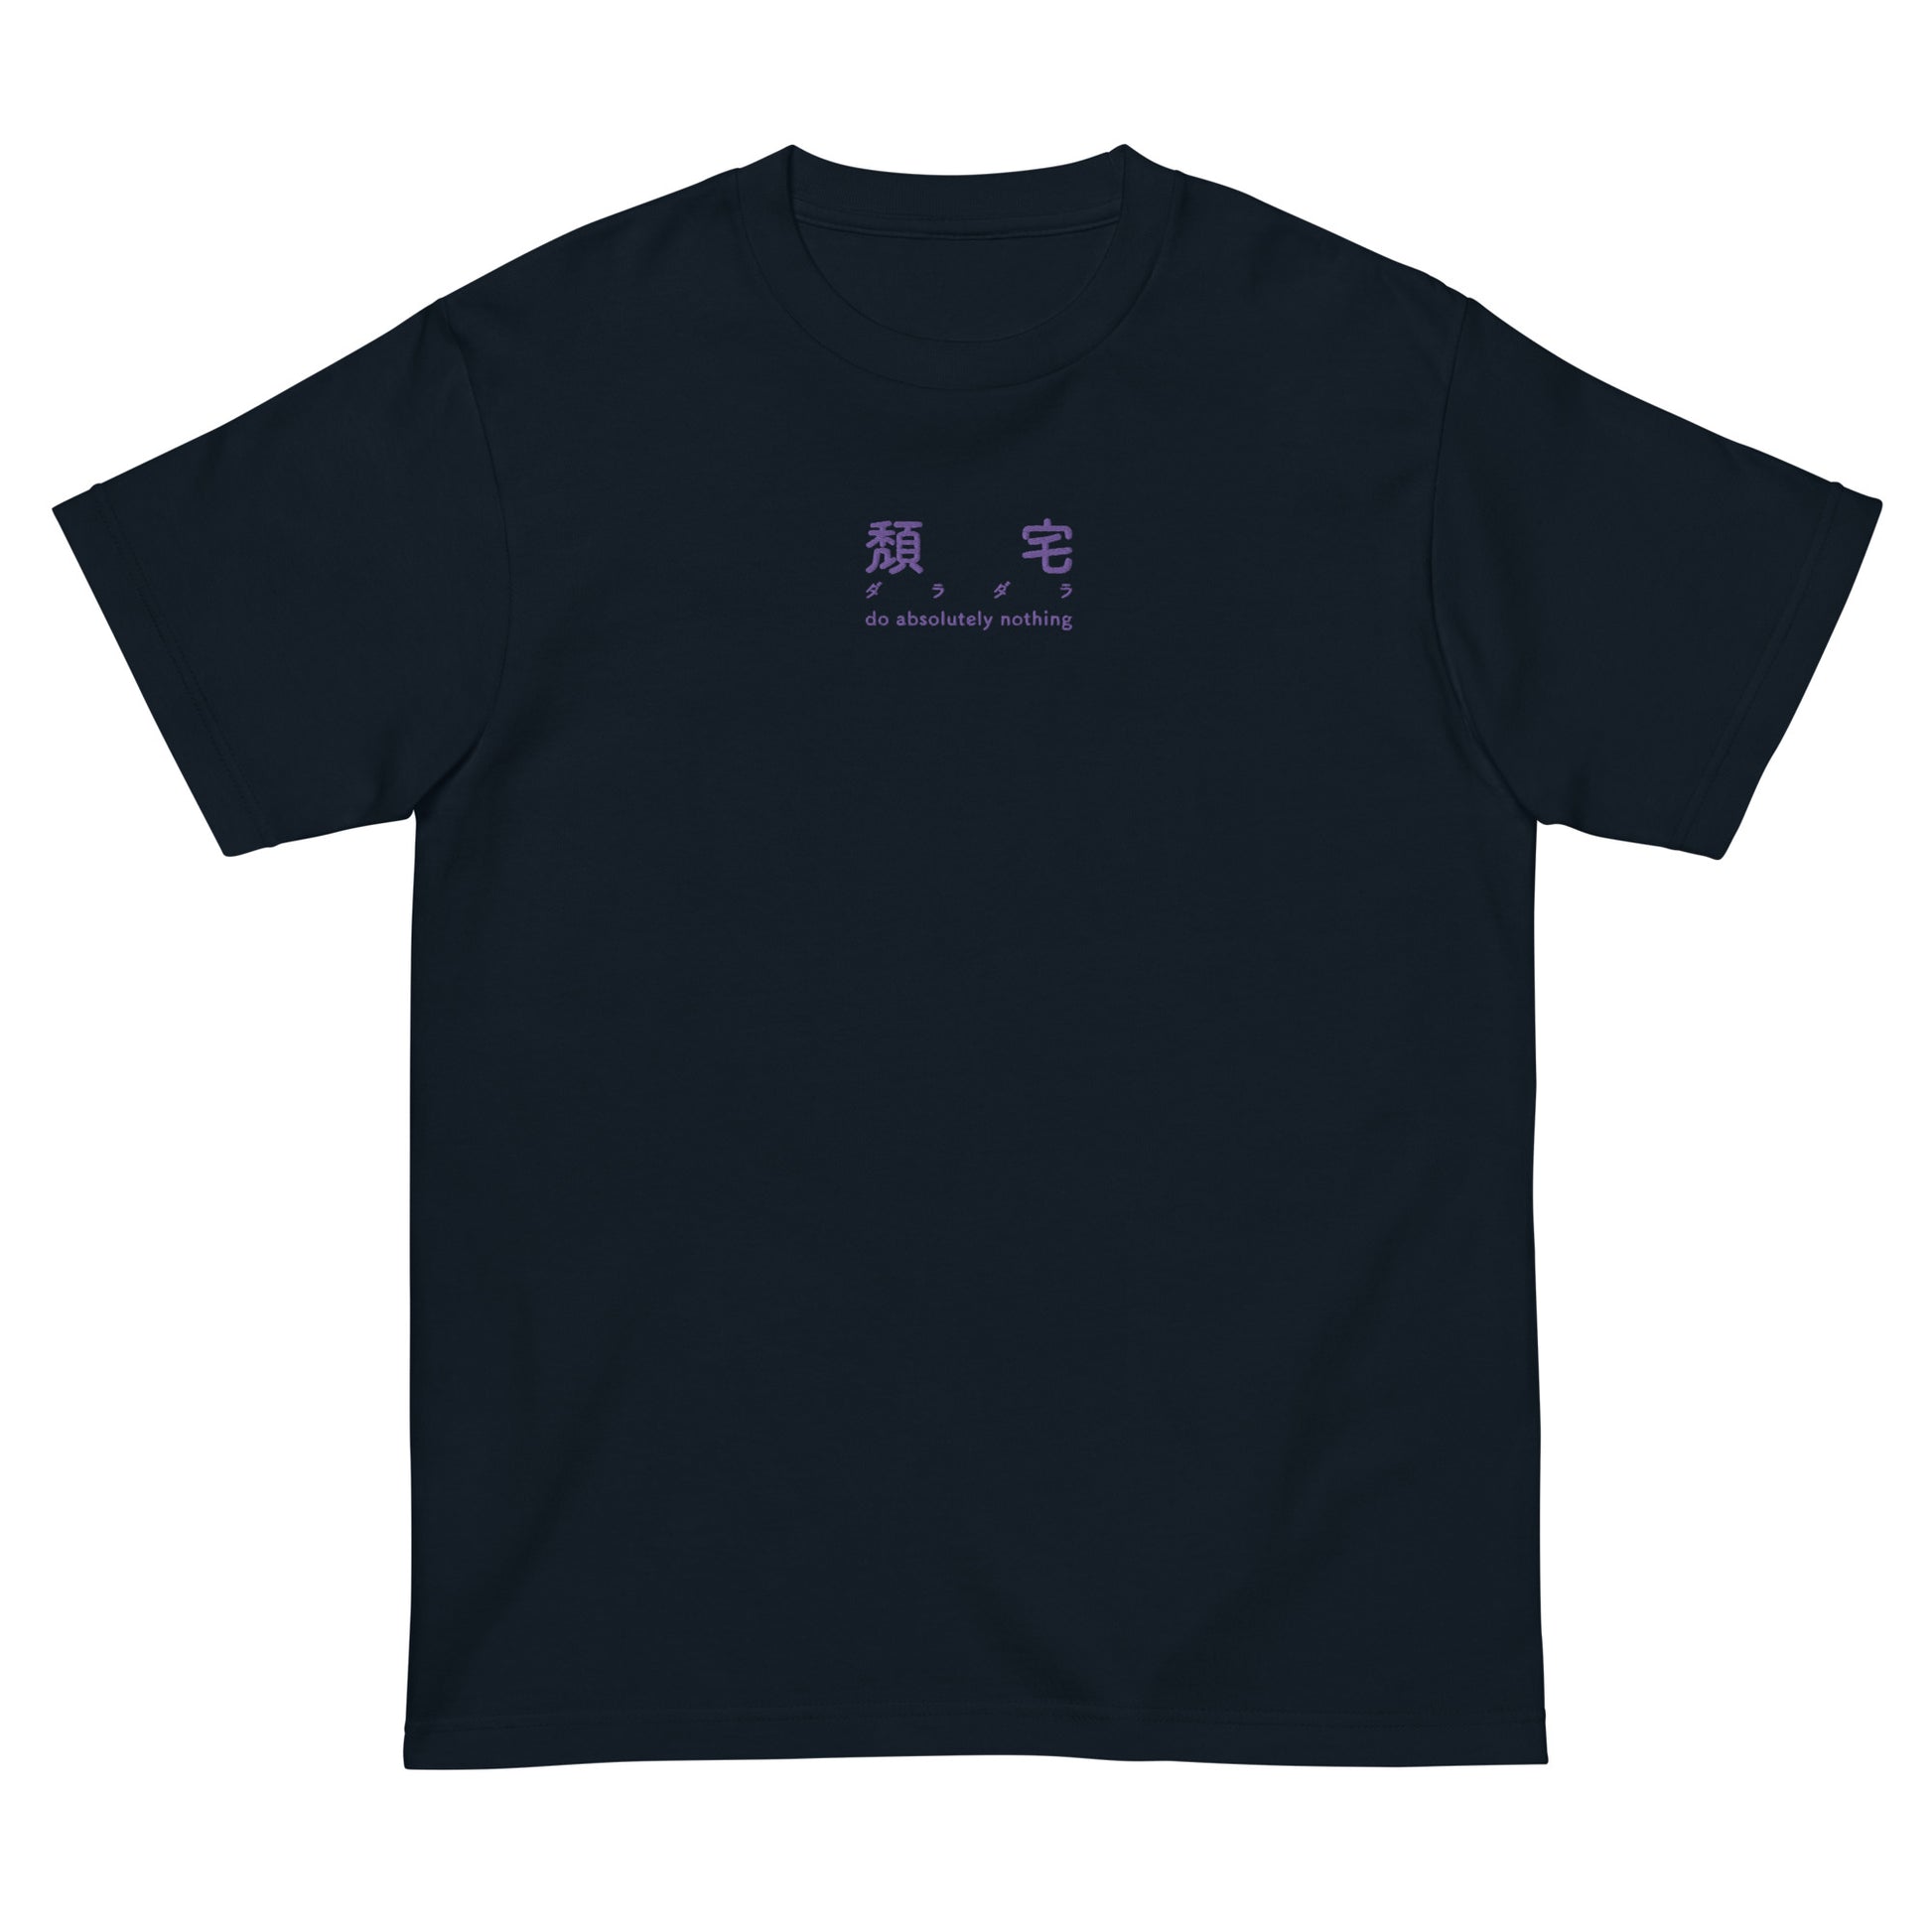 Navy High Quality Tee - Front Design with an Purple Embroidery "do absolutely nothing" in three languages